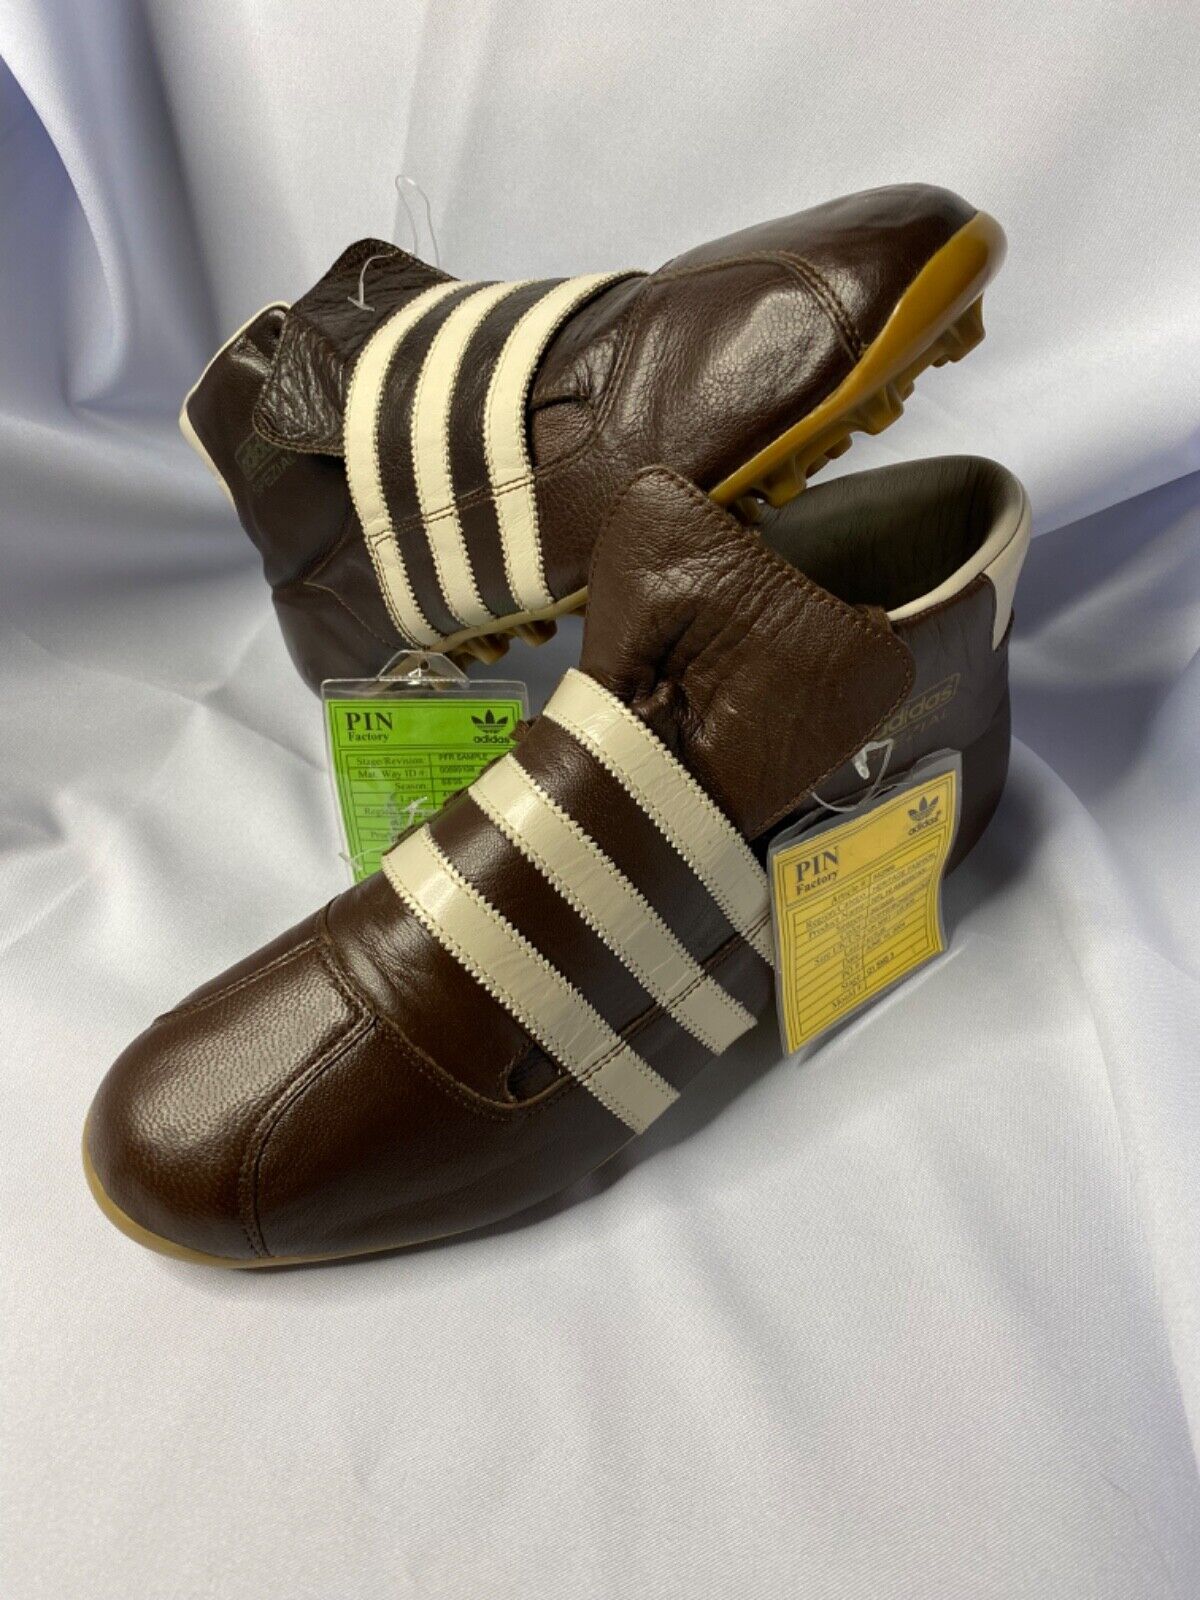 RARE Sample ADIDAS SPEZIAL NFL Cleats Vintage Pin Factory Collection US 9 Eur 42